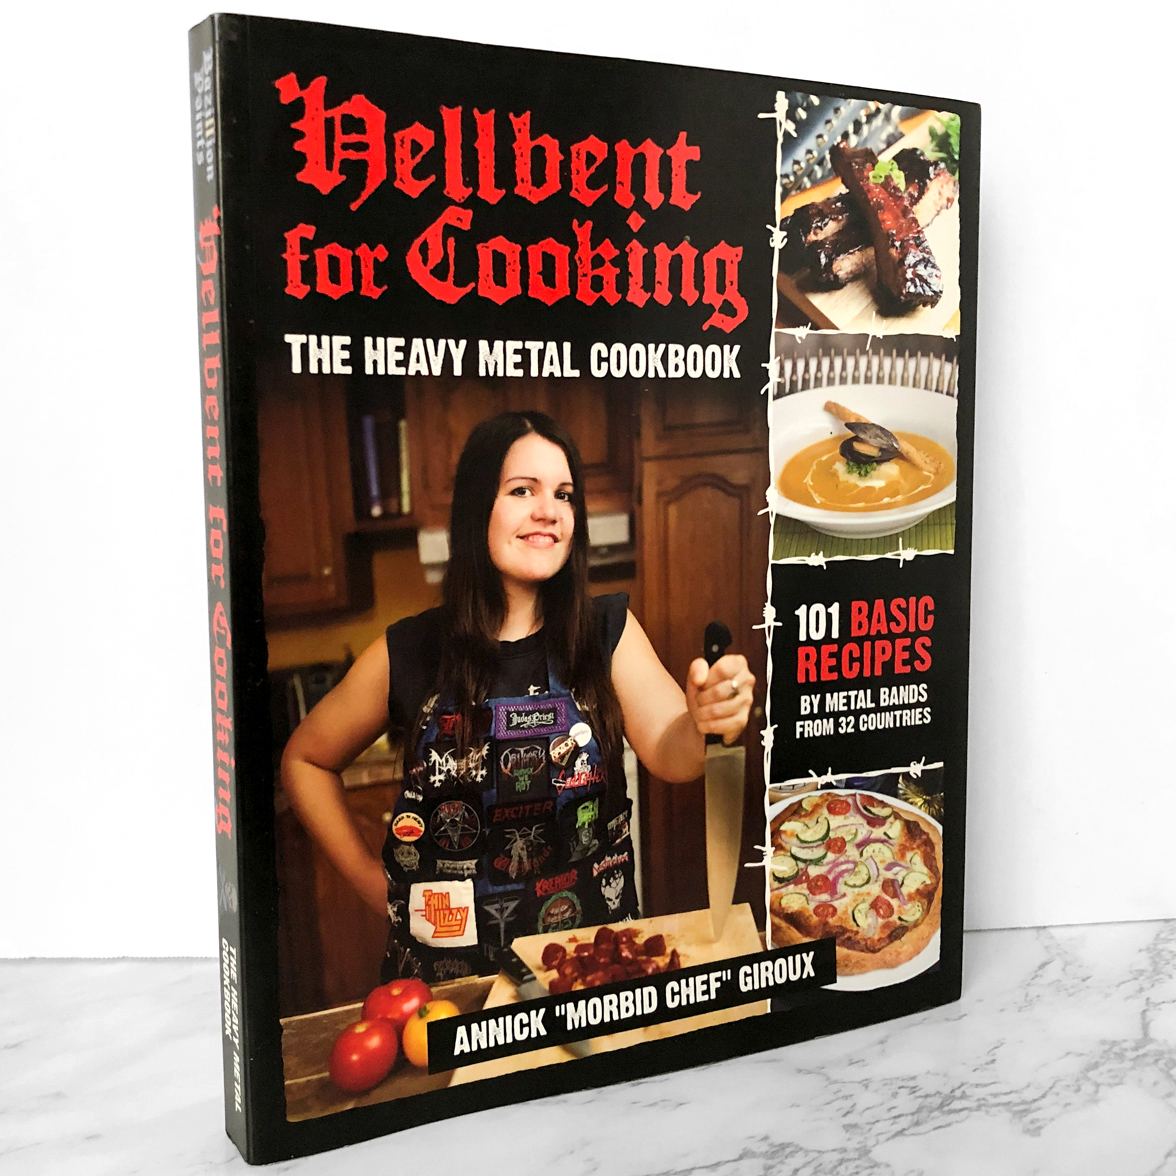 Finally, a Heavy Metal Cookbook: 'Hellbent for Cooking